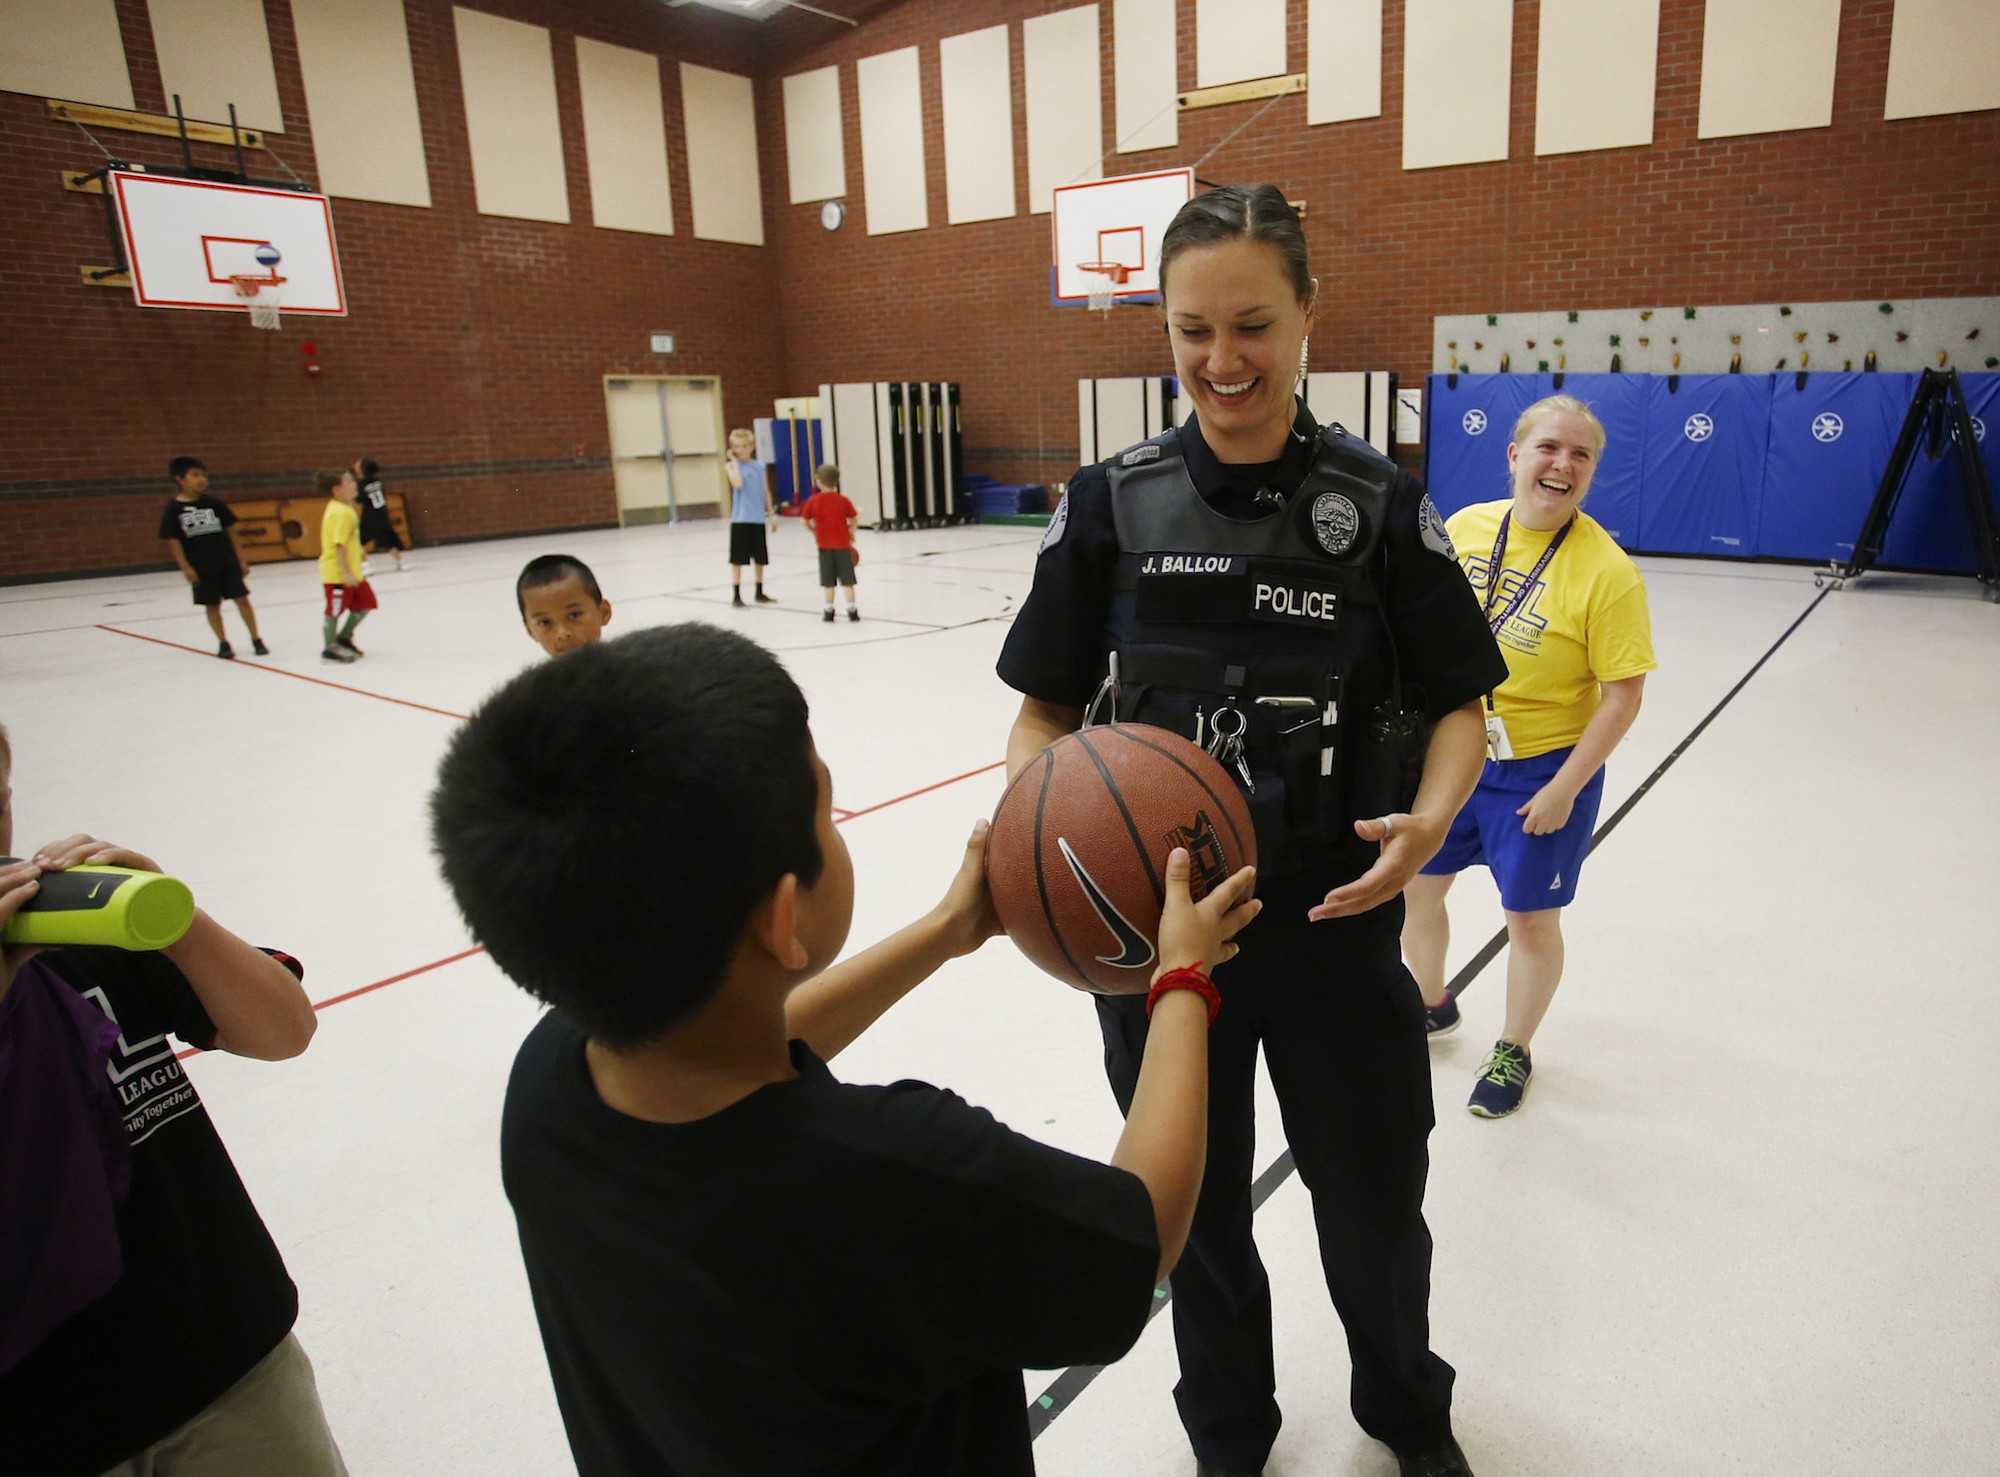 Photos by Steve Dipaola for the Columbian
Vancouver police Officer Julie Ballou accepts a basketball from a boy at Police Activities League of Vancouver summer camp at Orchards Elementary. Jenny Thompson, right, in yellow shirt, executive director of PAL, served as referee.